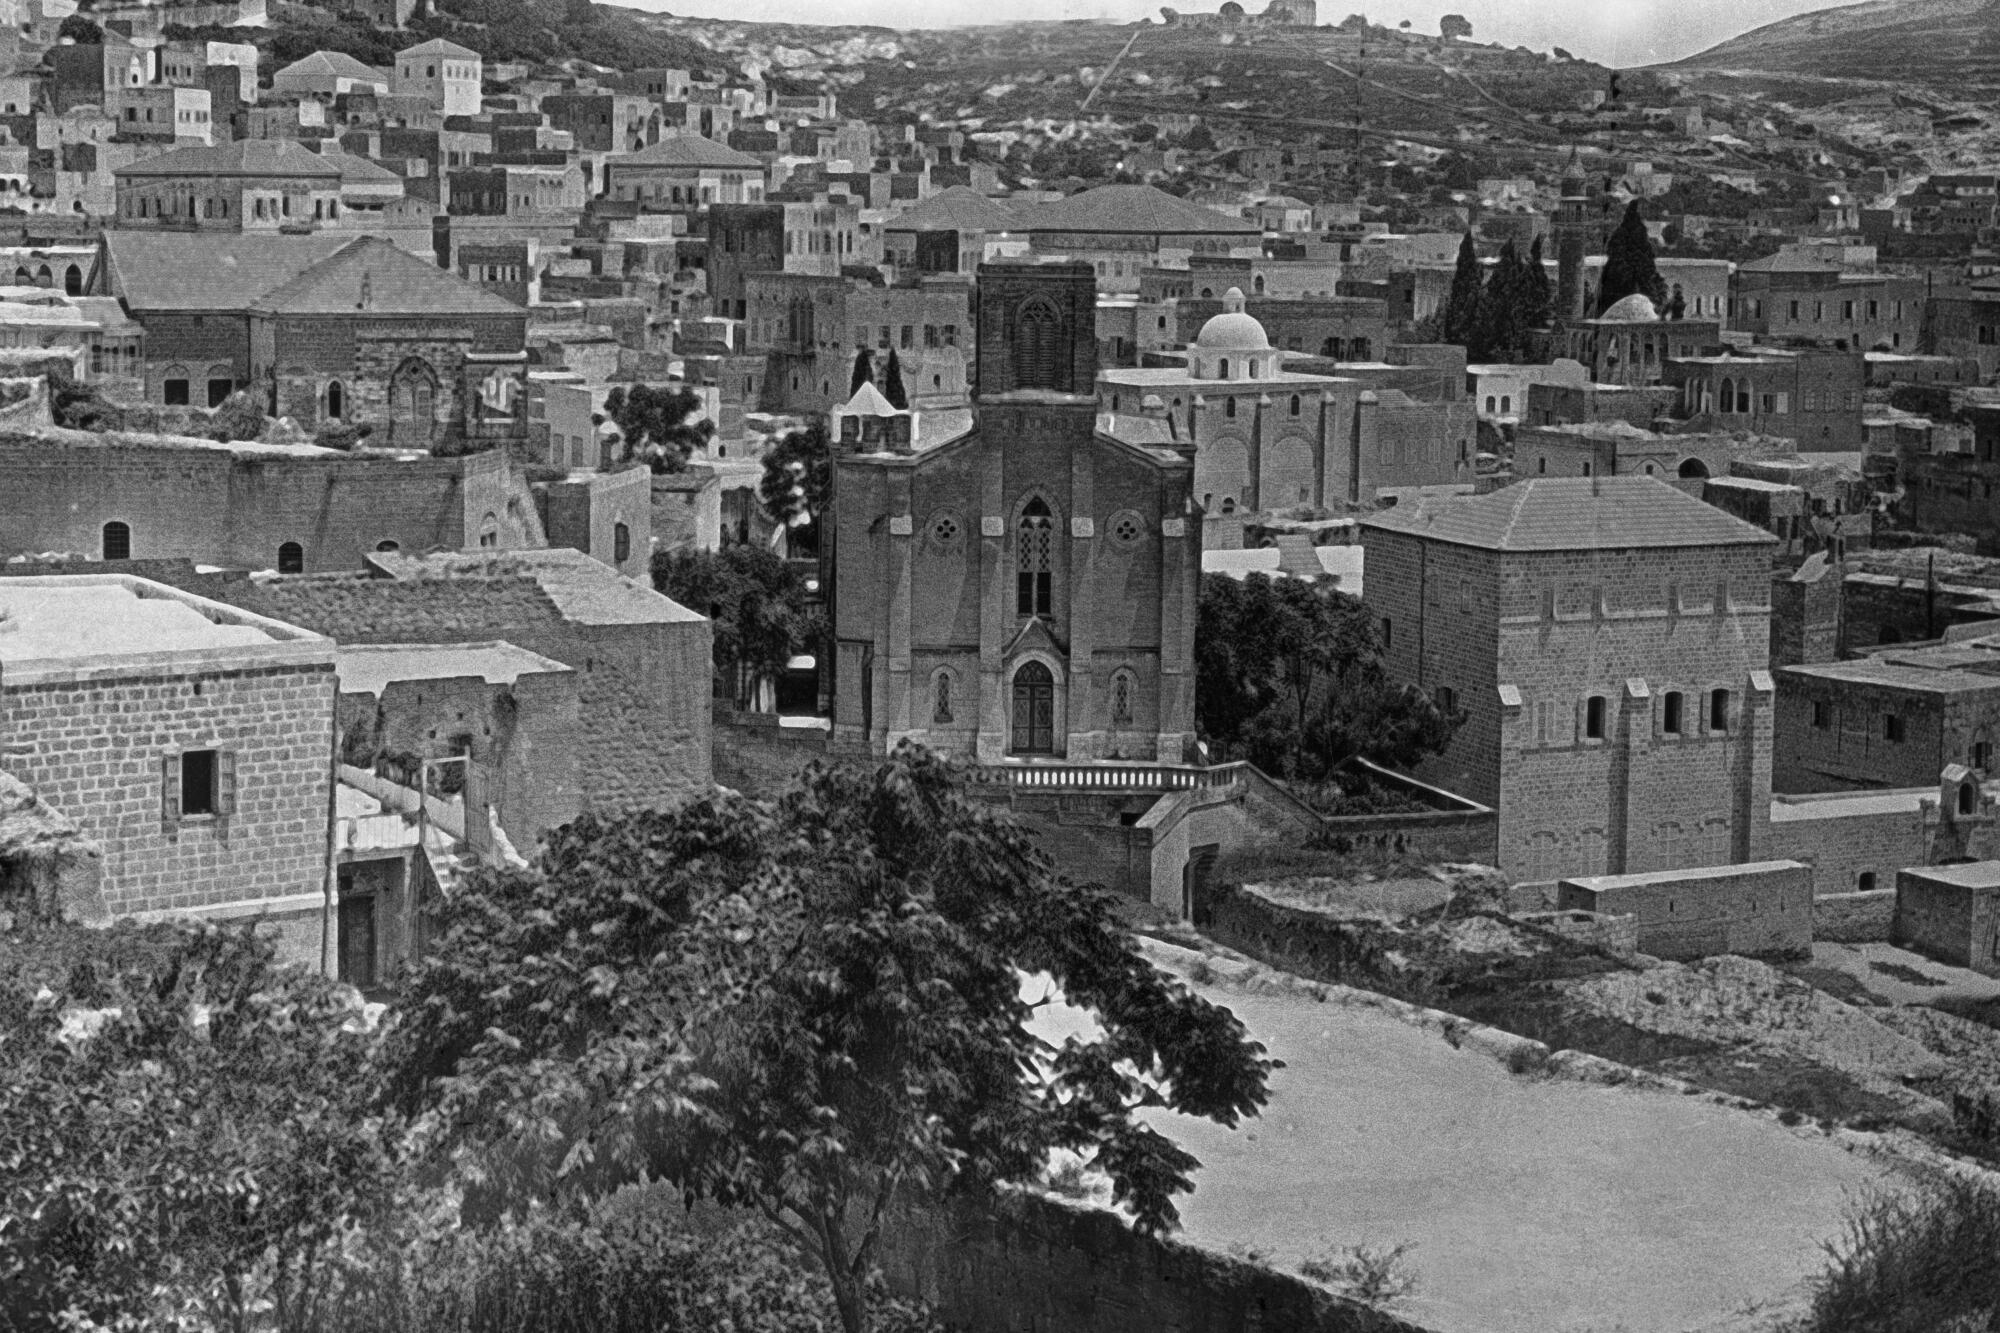 A black-and-white photo of an old city amongst some hills